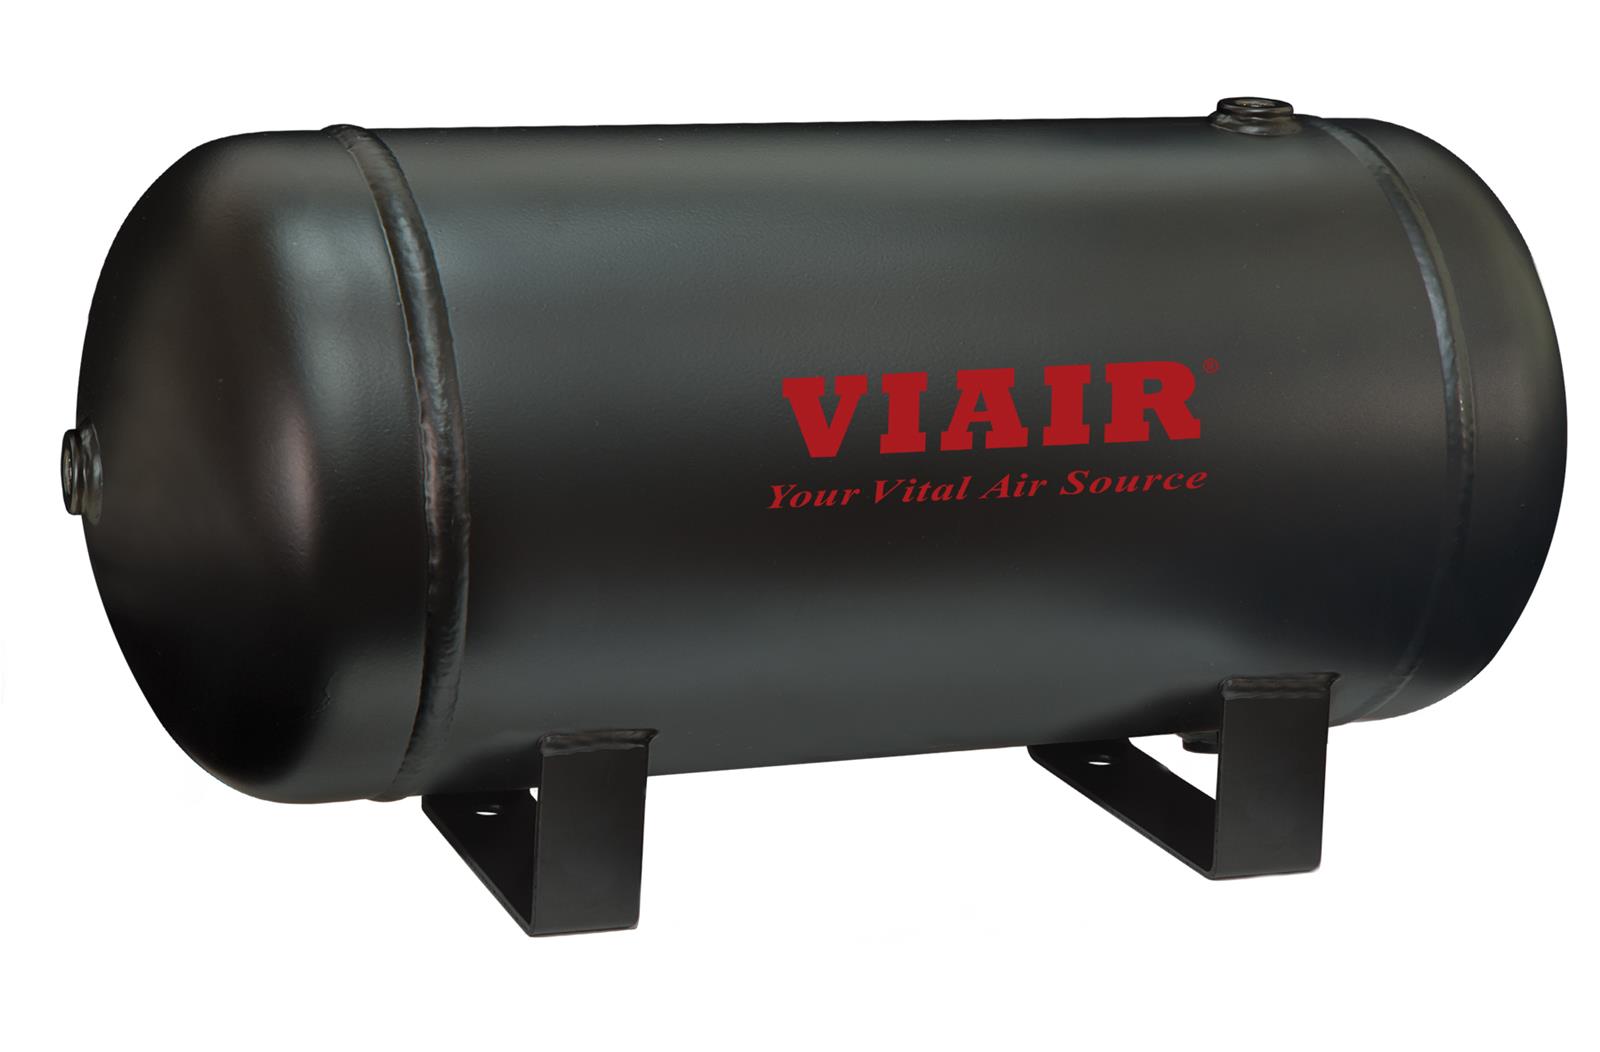 VIA-91050 5.0 Gallon Air Tank with two 1/4" ports & 3/8" NPT Ports, 150 PSI Rated 22"L x 11.25W x 12.25"H